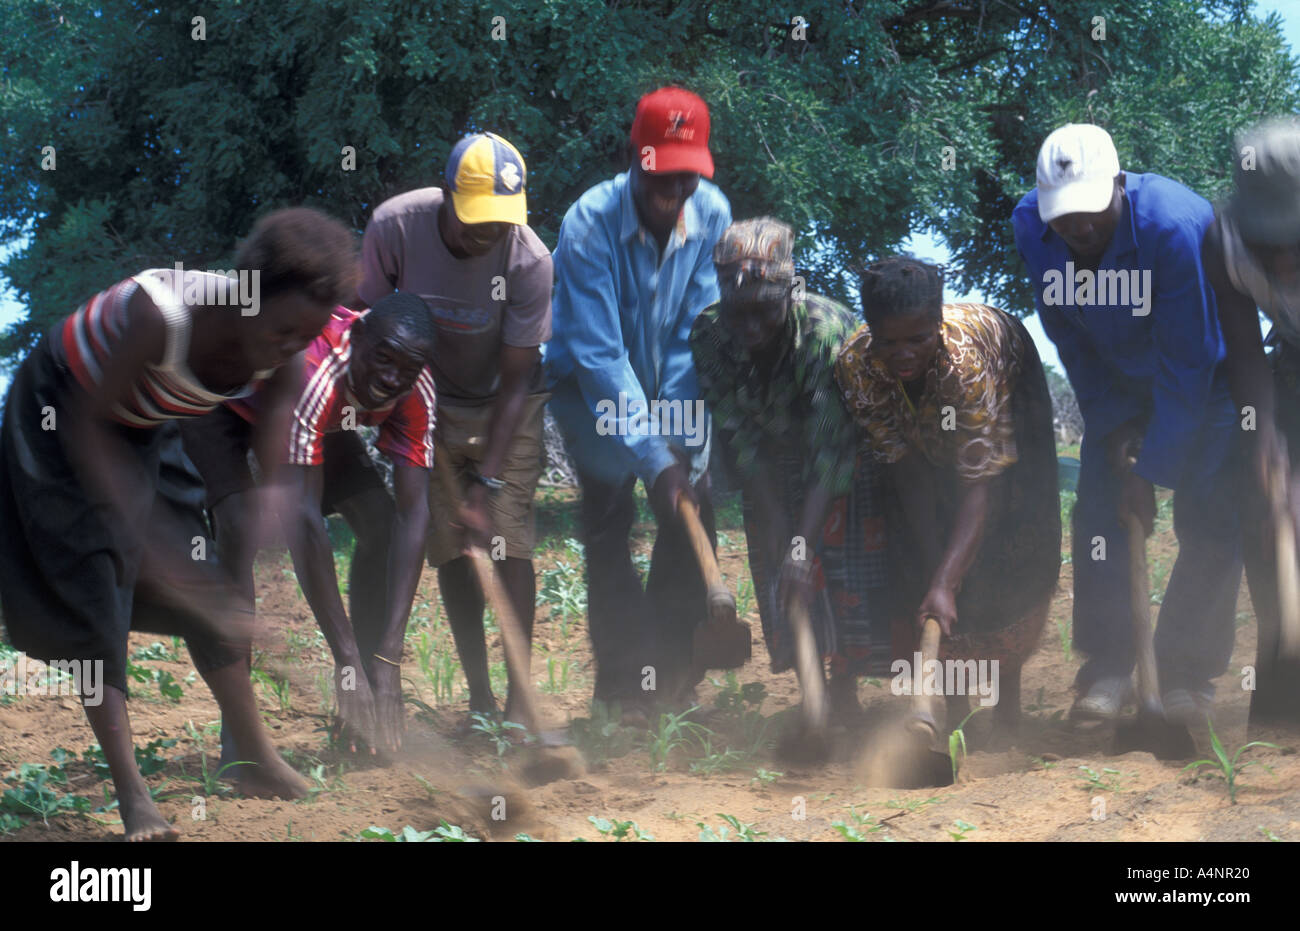 Farm workers of Ocambo tribe working field with hoes rainy season Ovamboland Namibia Africa Stock Photo